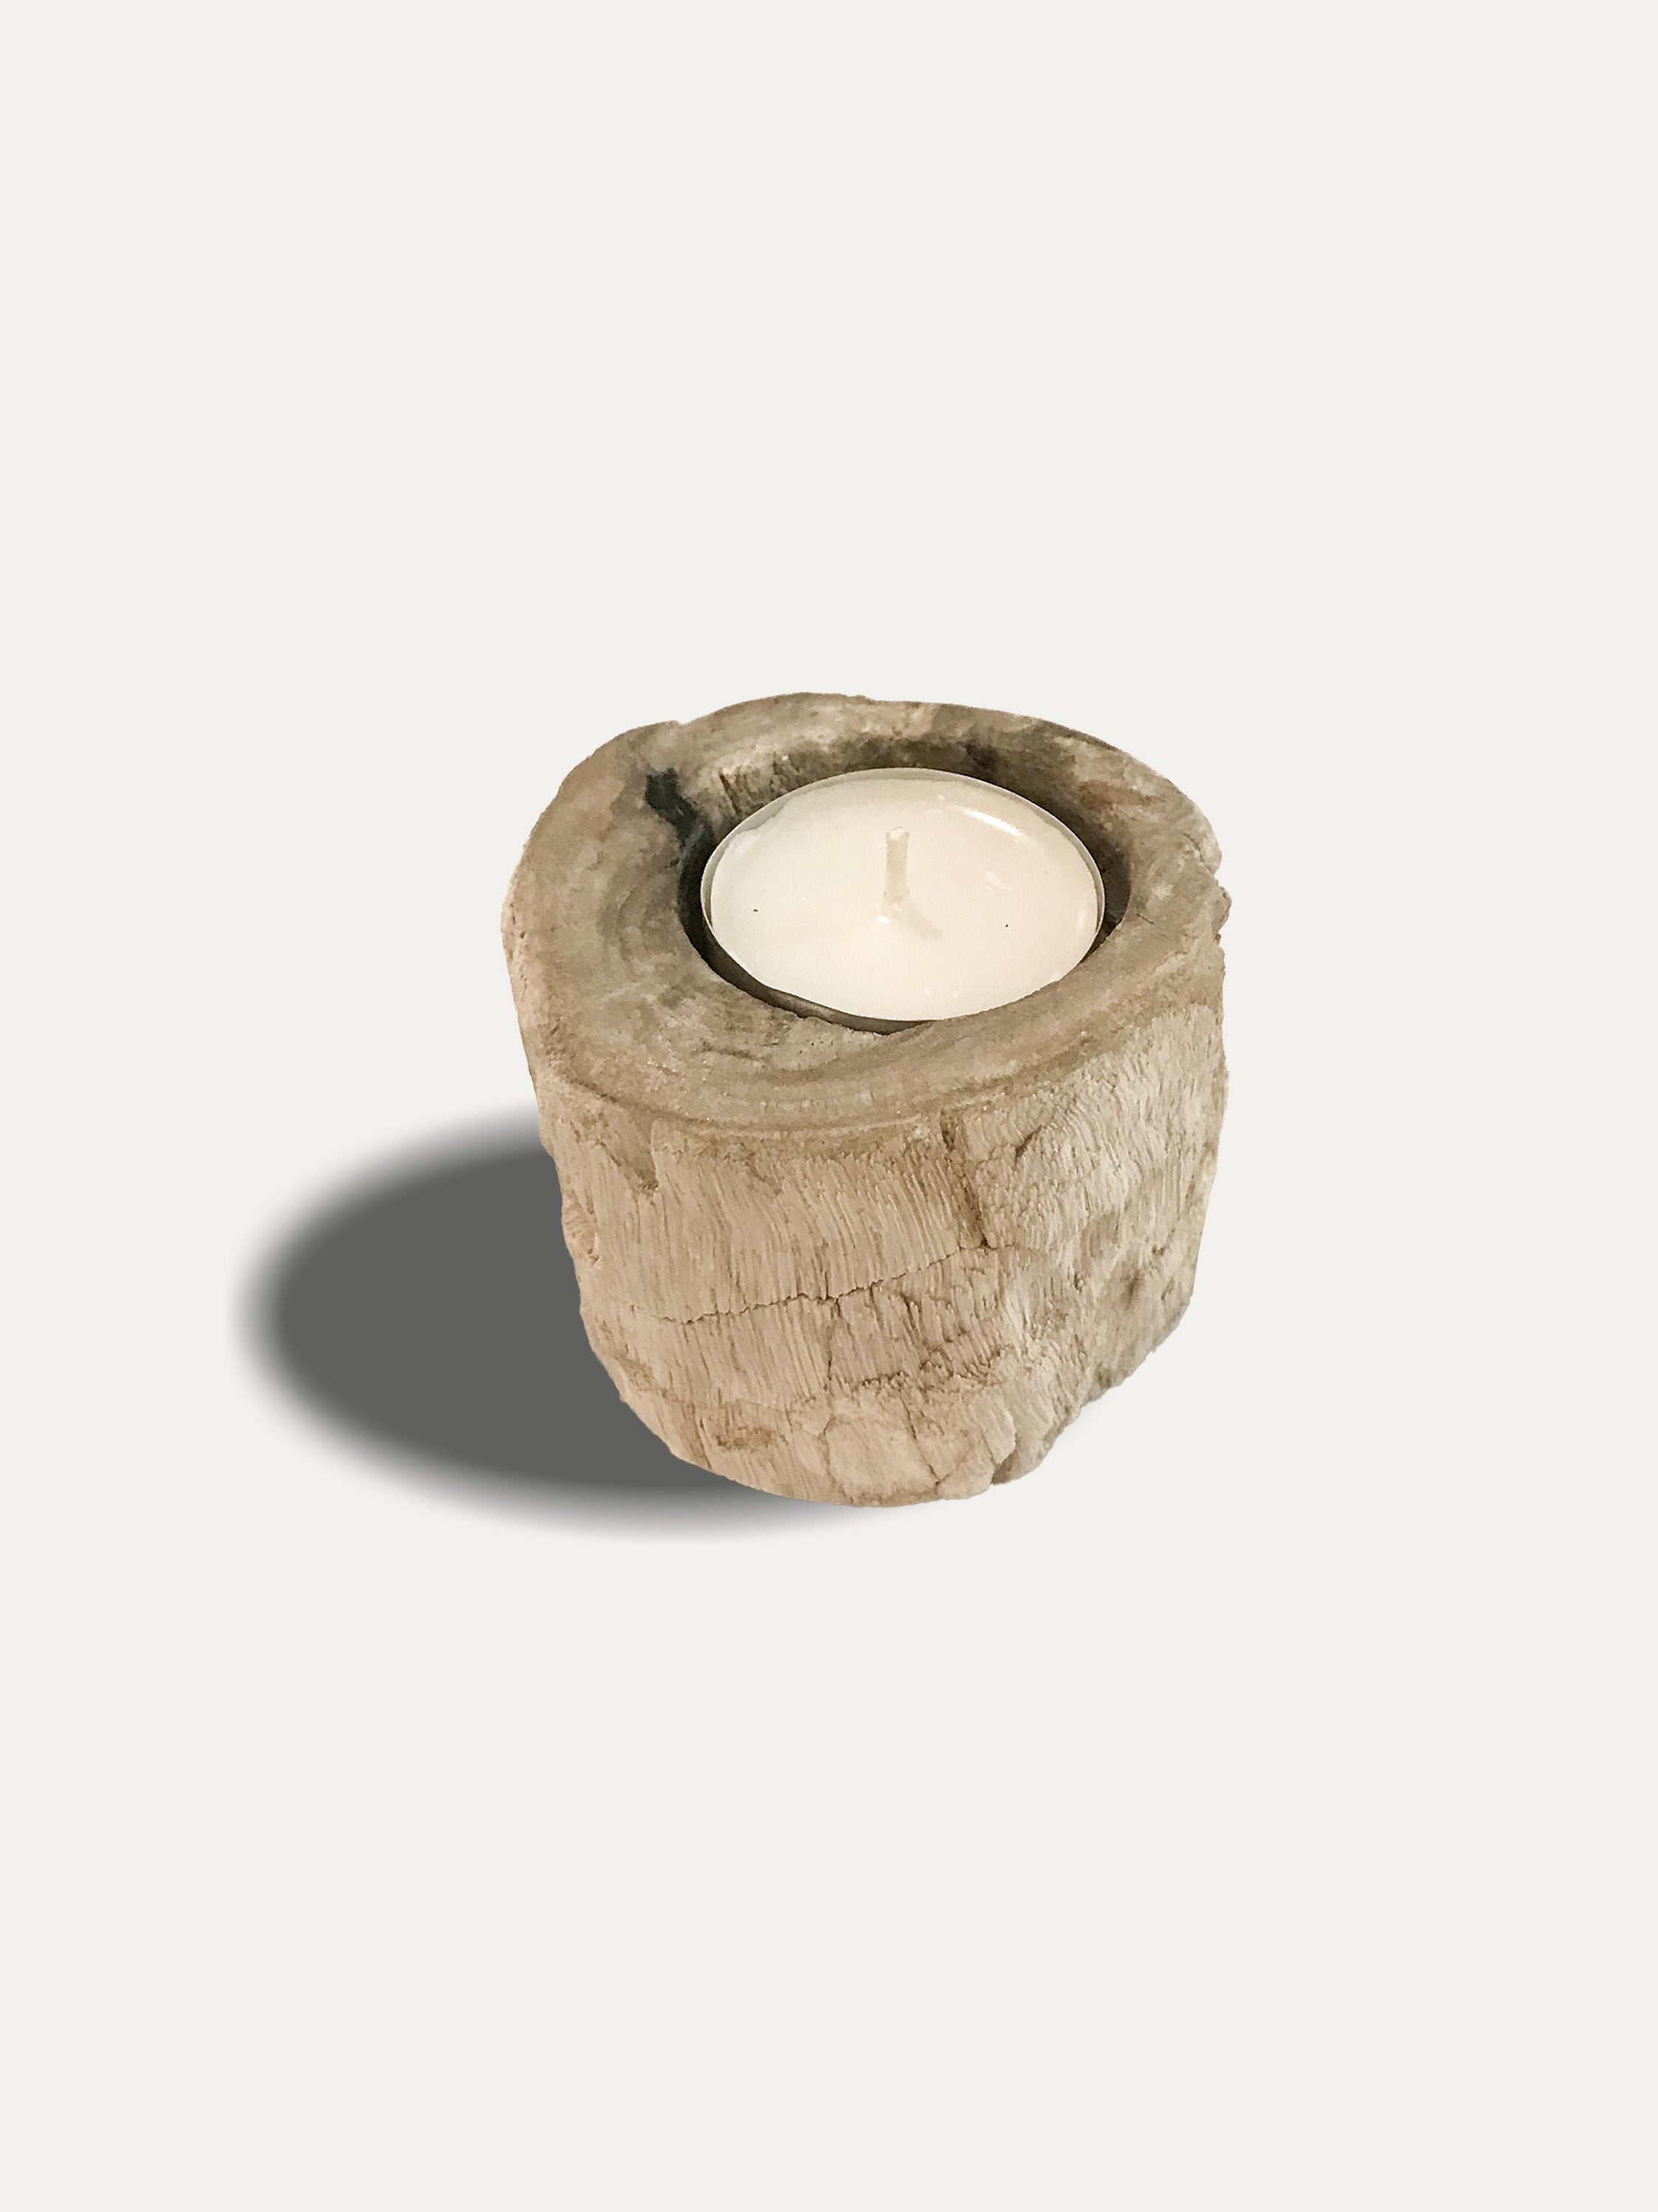 Candle holder in petrified wood, legno fossile, home accessories